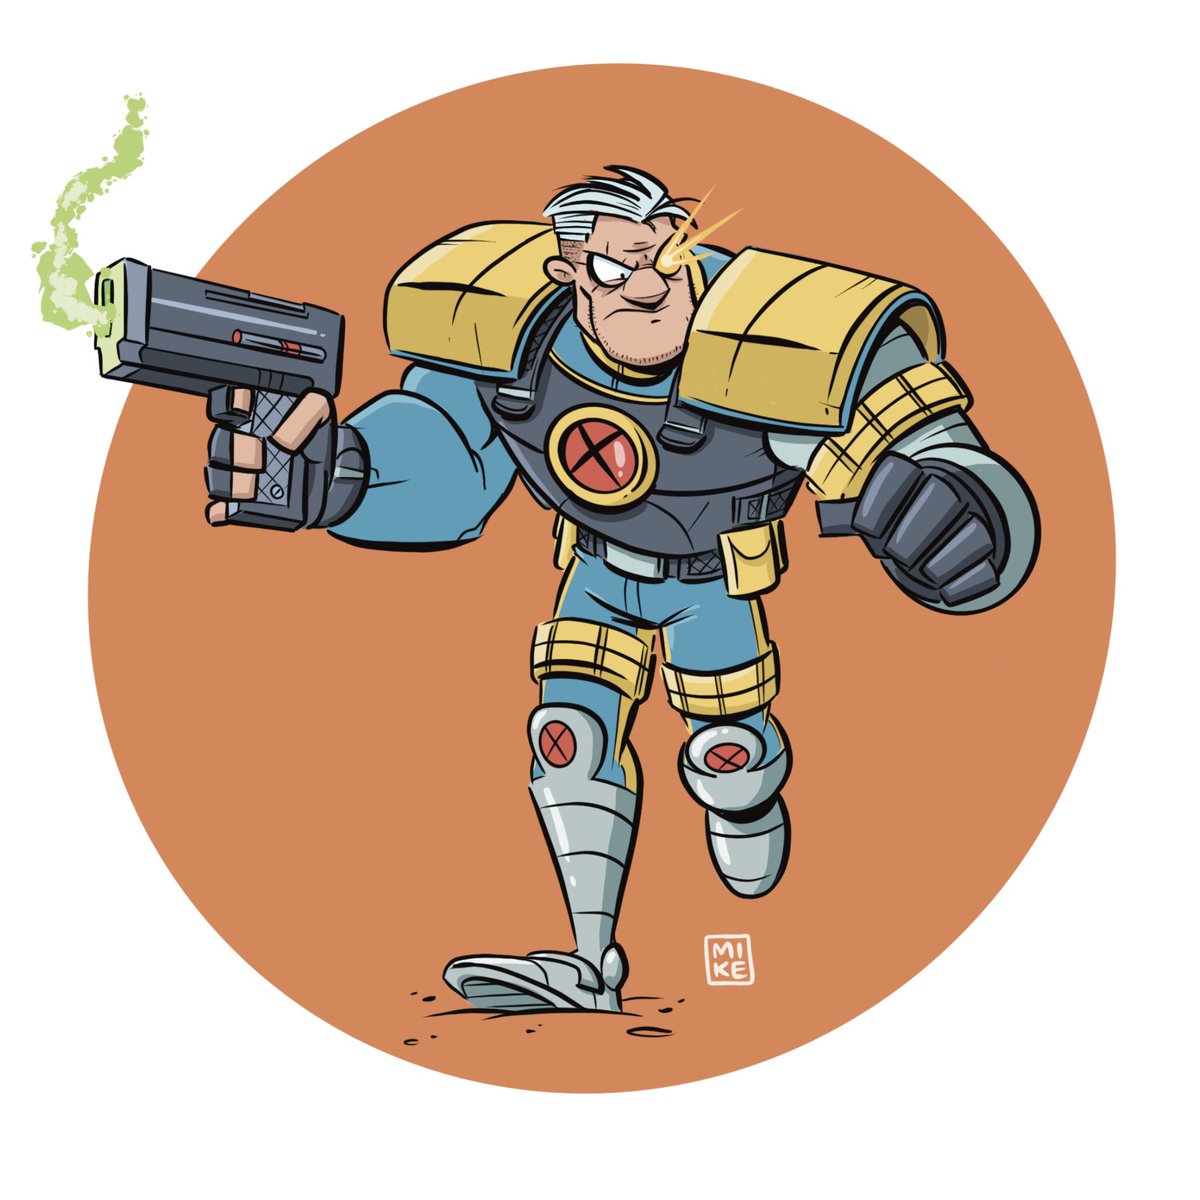 #marvelMonday theme is artist’s choice and whenever I can’t think of someone to draw I default to Cable…so here’s a new Cable pic!
#xmen #cable #xforce #marvel @Marvel